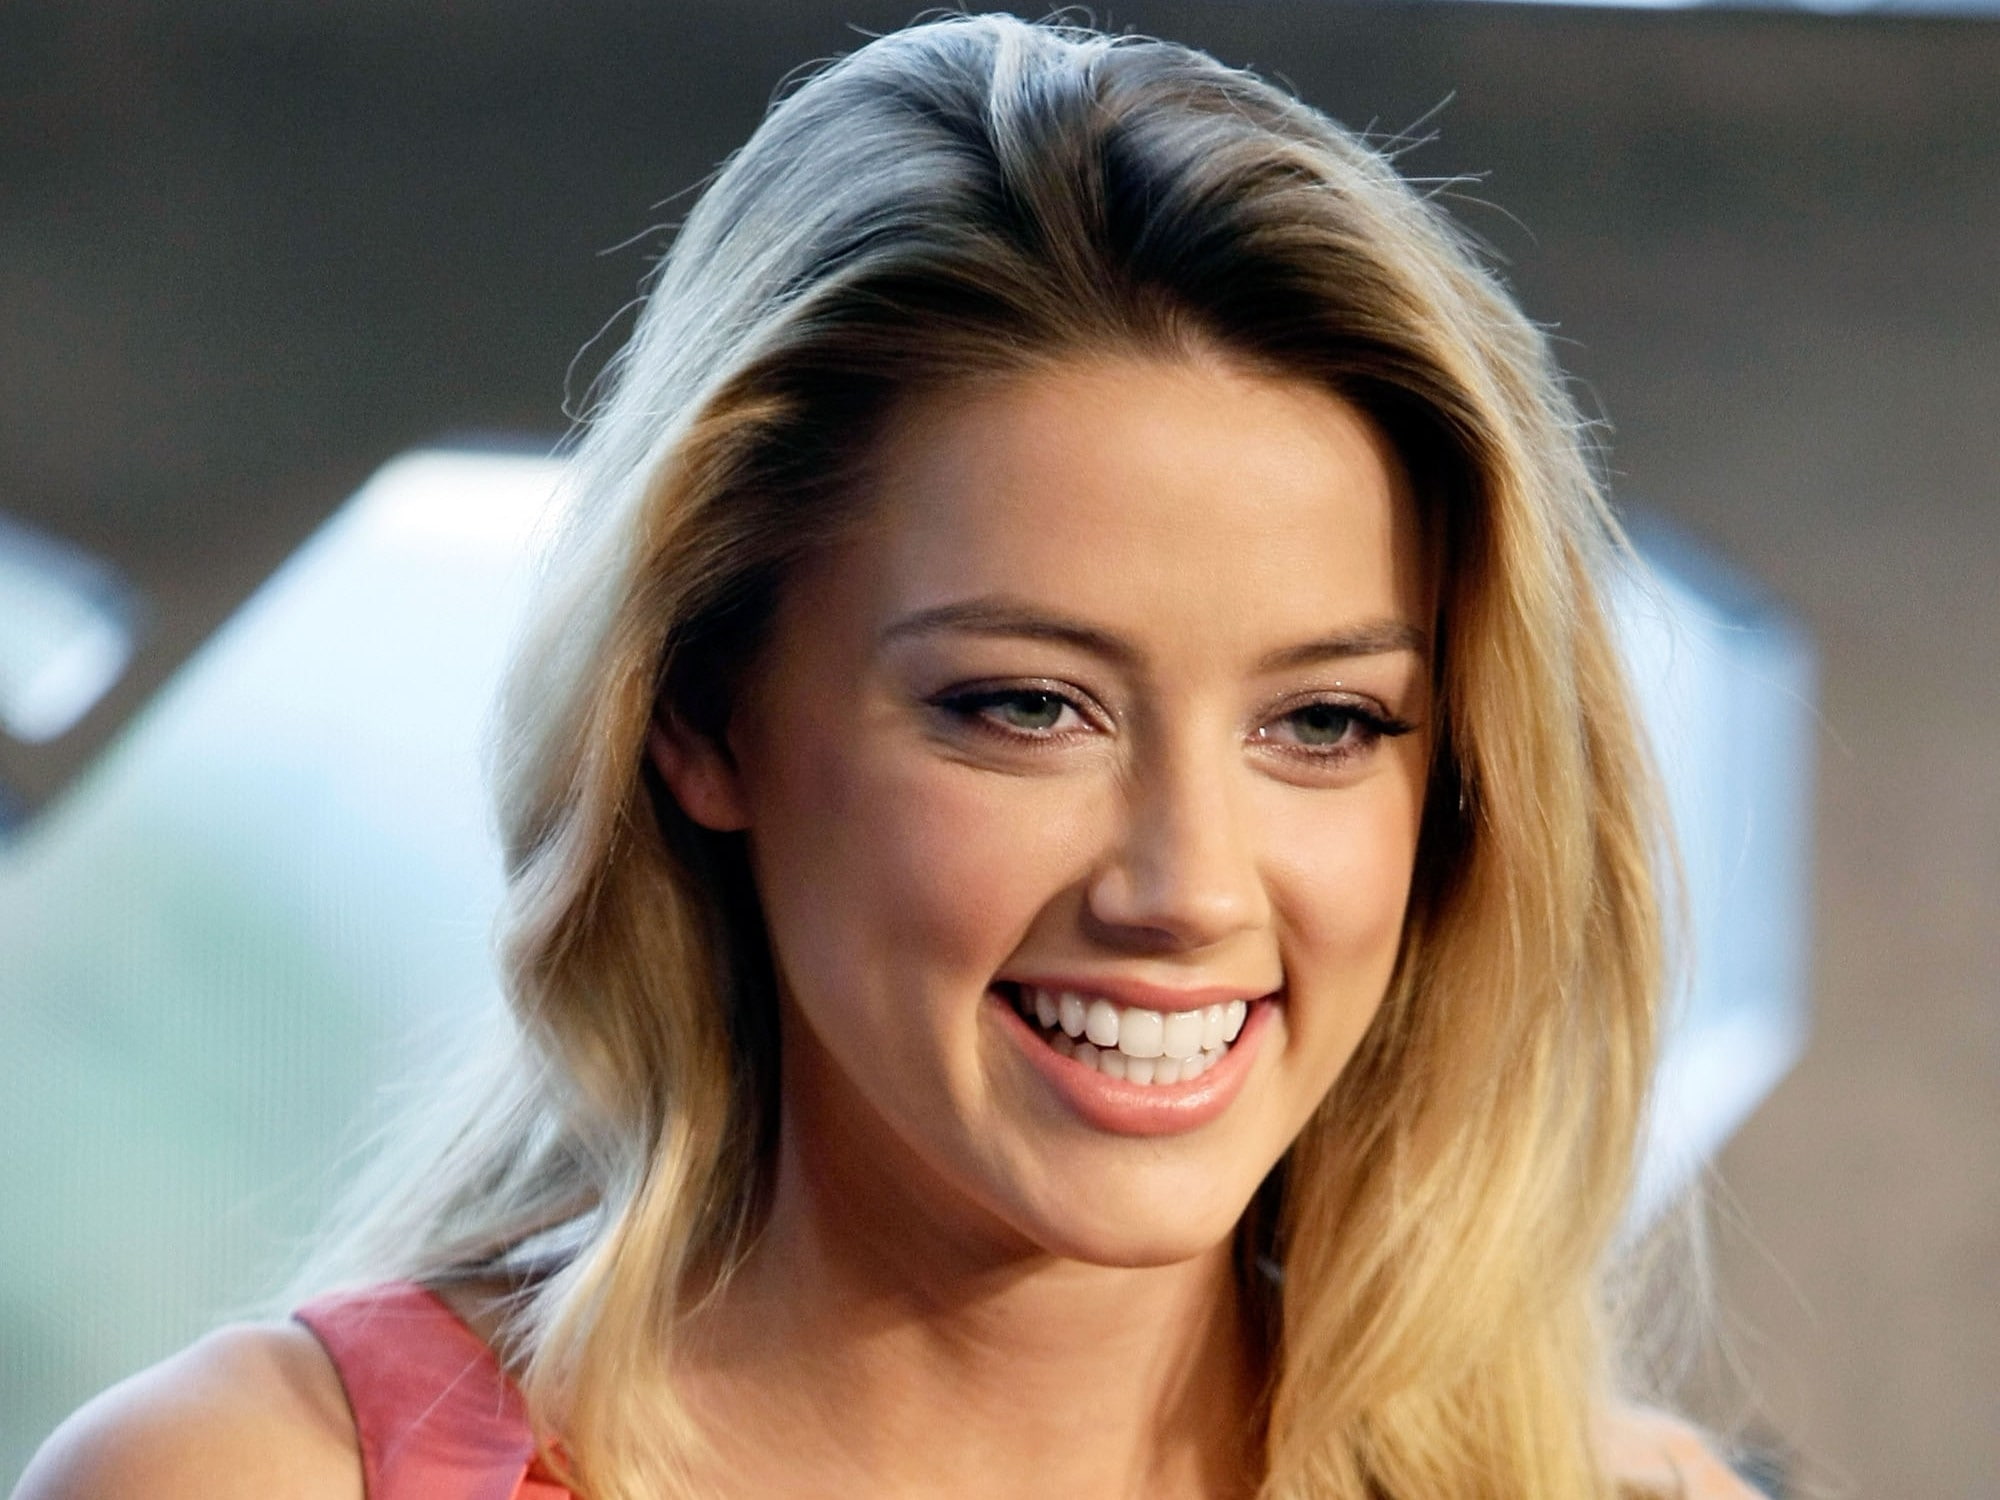 Amber Heard Smiling With Teeth , HD Wallpaper & Backgrounds